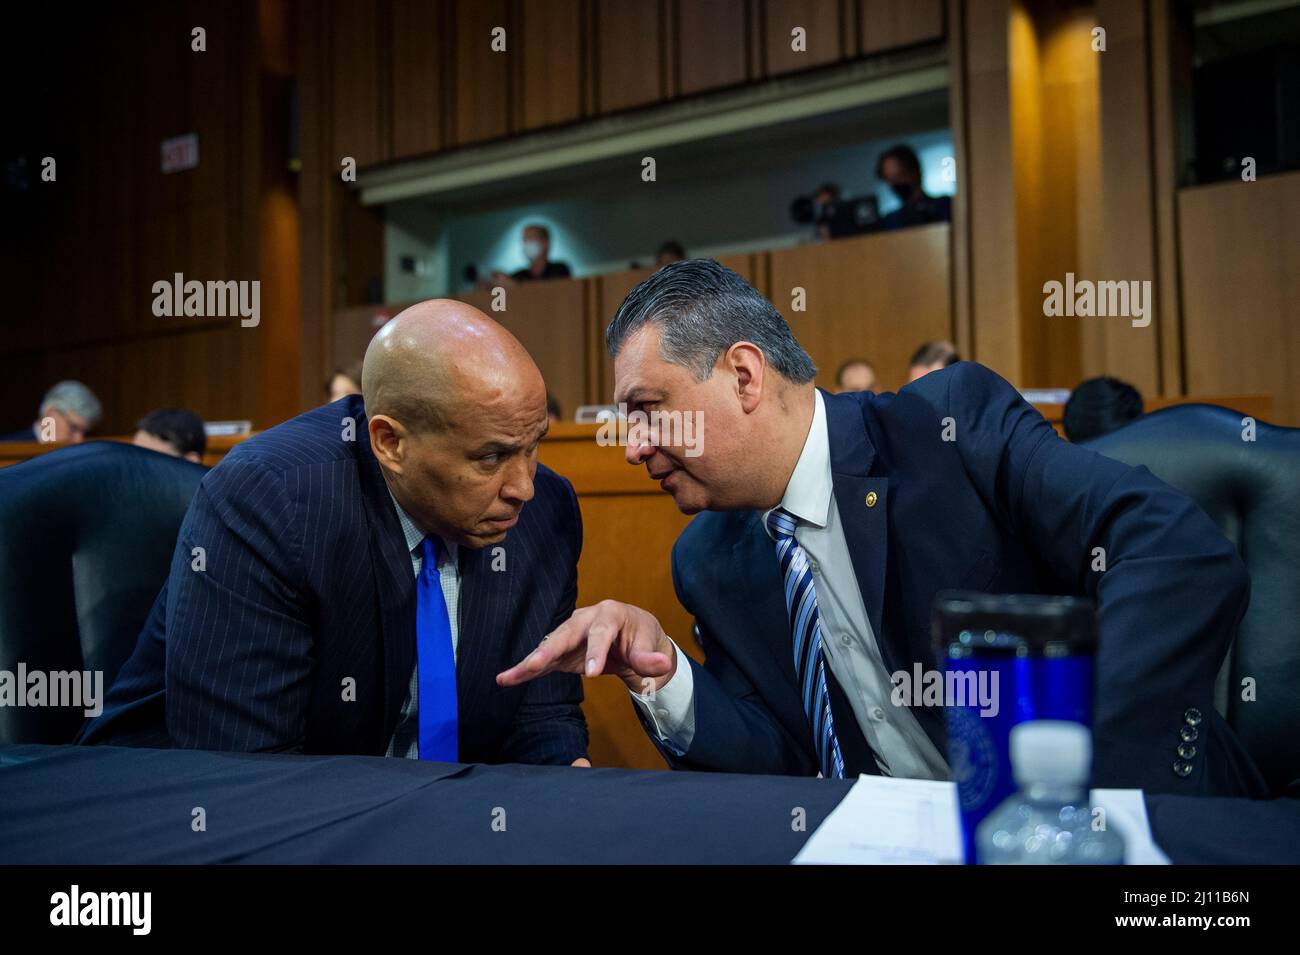 United States Senator Cory Booker (Democrat of New Jersey), left, confers with United States Senator Alex Padilla (Democrat of California) as Judge Ketanji Brown Jackson appears for the first day of her Senate nomination hearings to be an Associate Justice of the Supreme Court of the United States, in the Hart Senate Office Building in Washington, DC, Monday, March 21, 2022. Credit: Rod Lamkey/CNP /MediaPunch Stock Photo